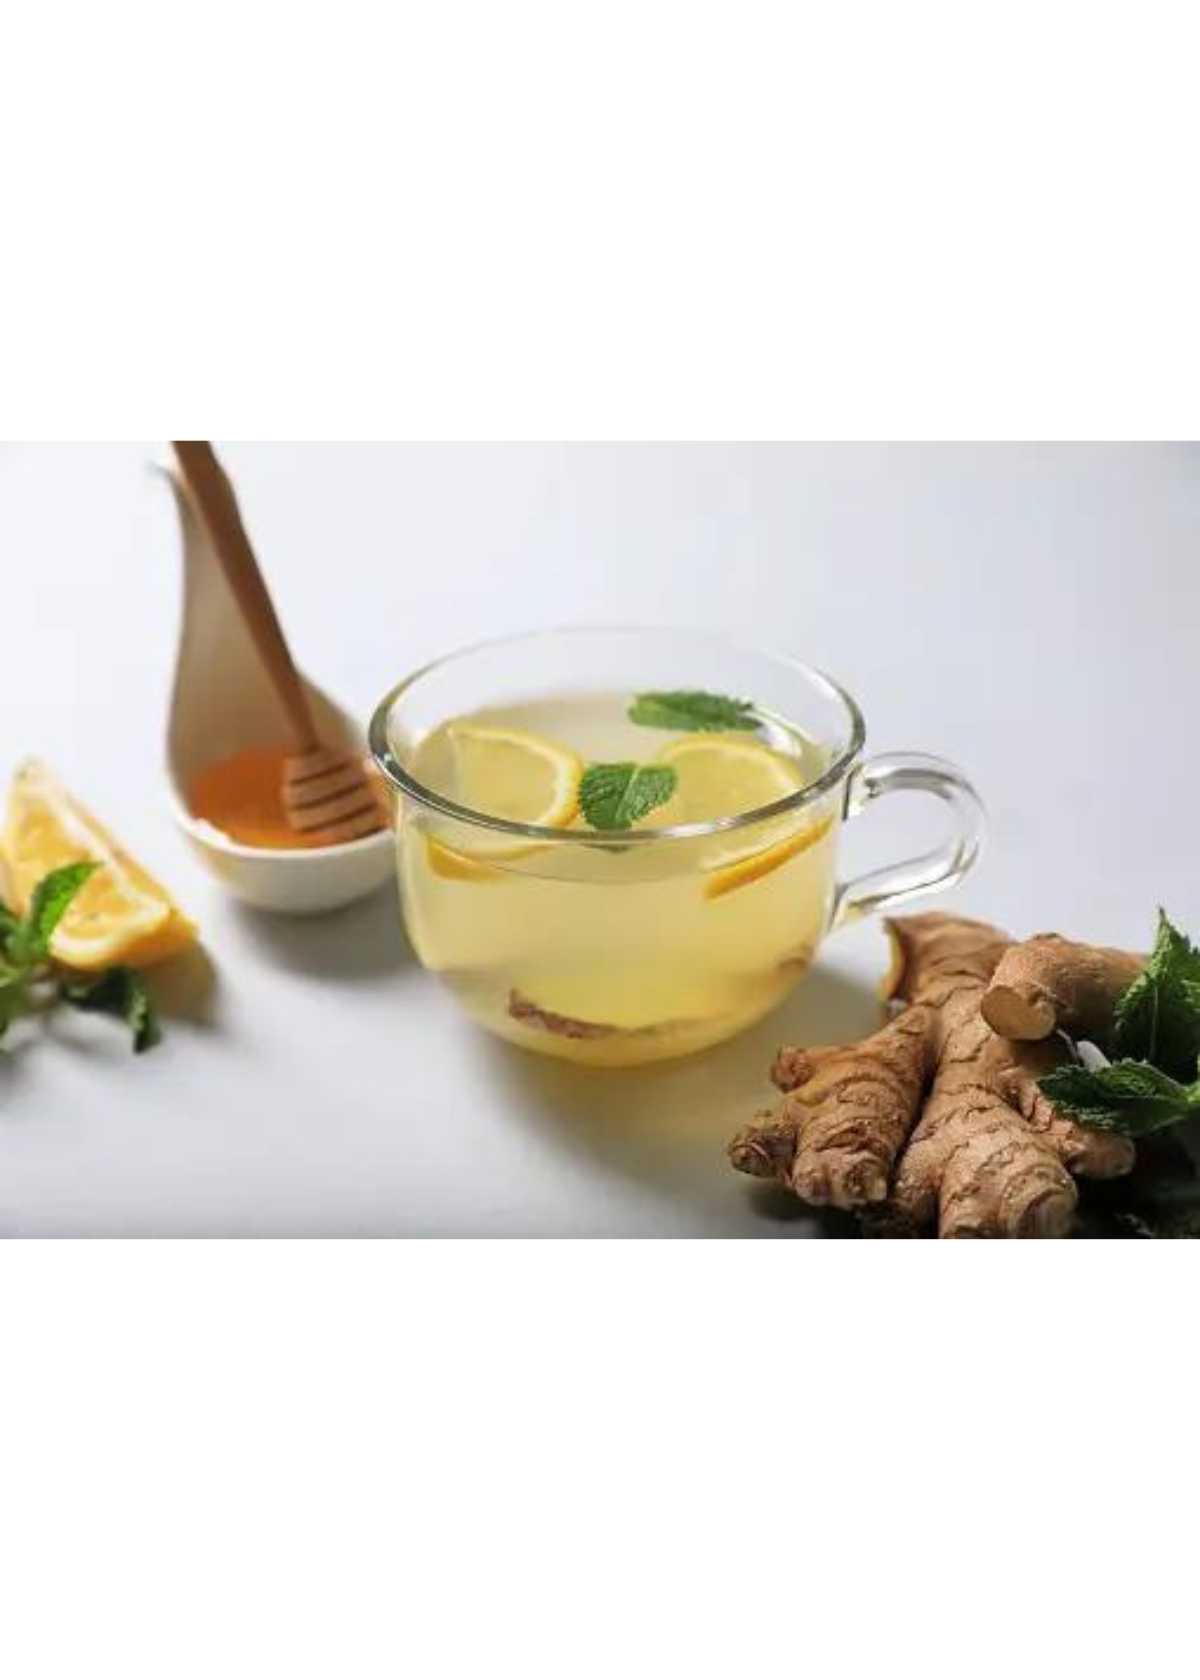 Discover the BEST Ginger Tea To Help You Feel Amazing Daily!